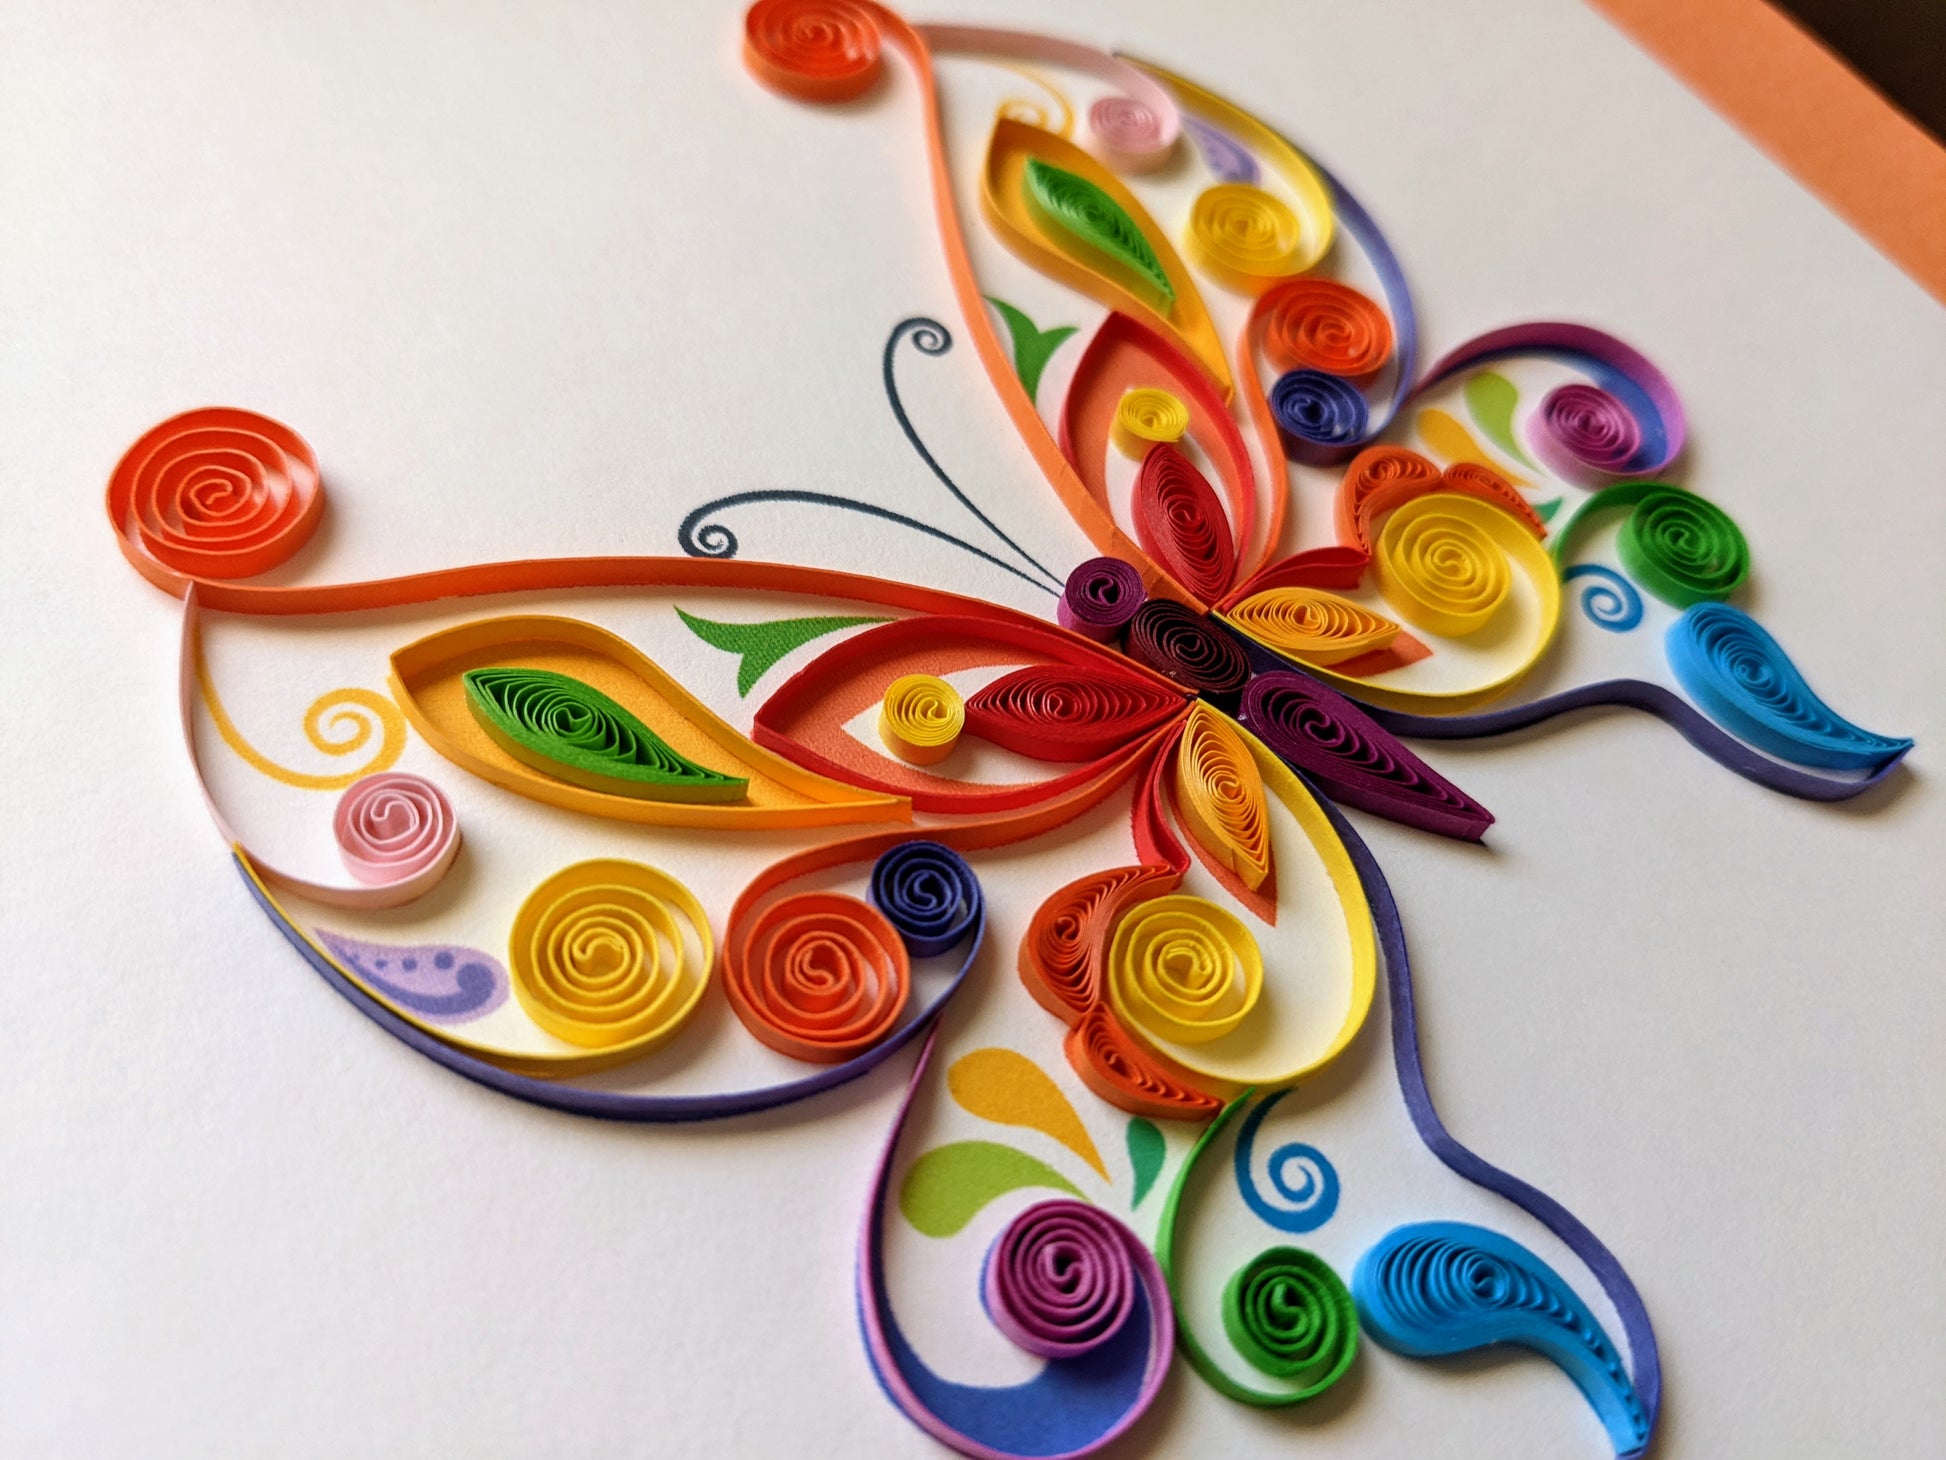 Butterfly Quilling Pattern - Store